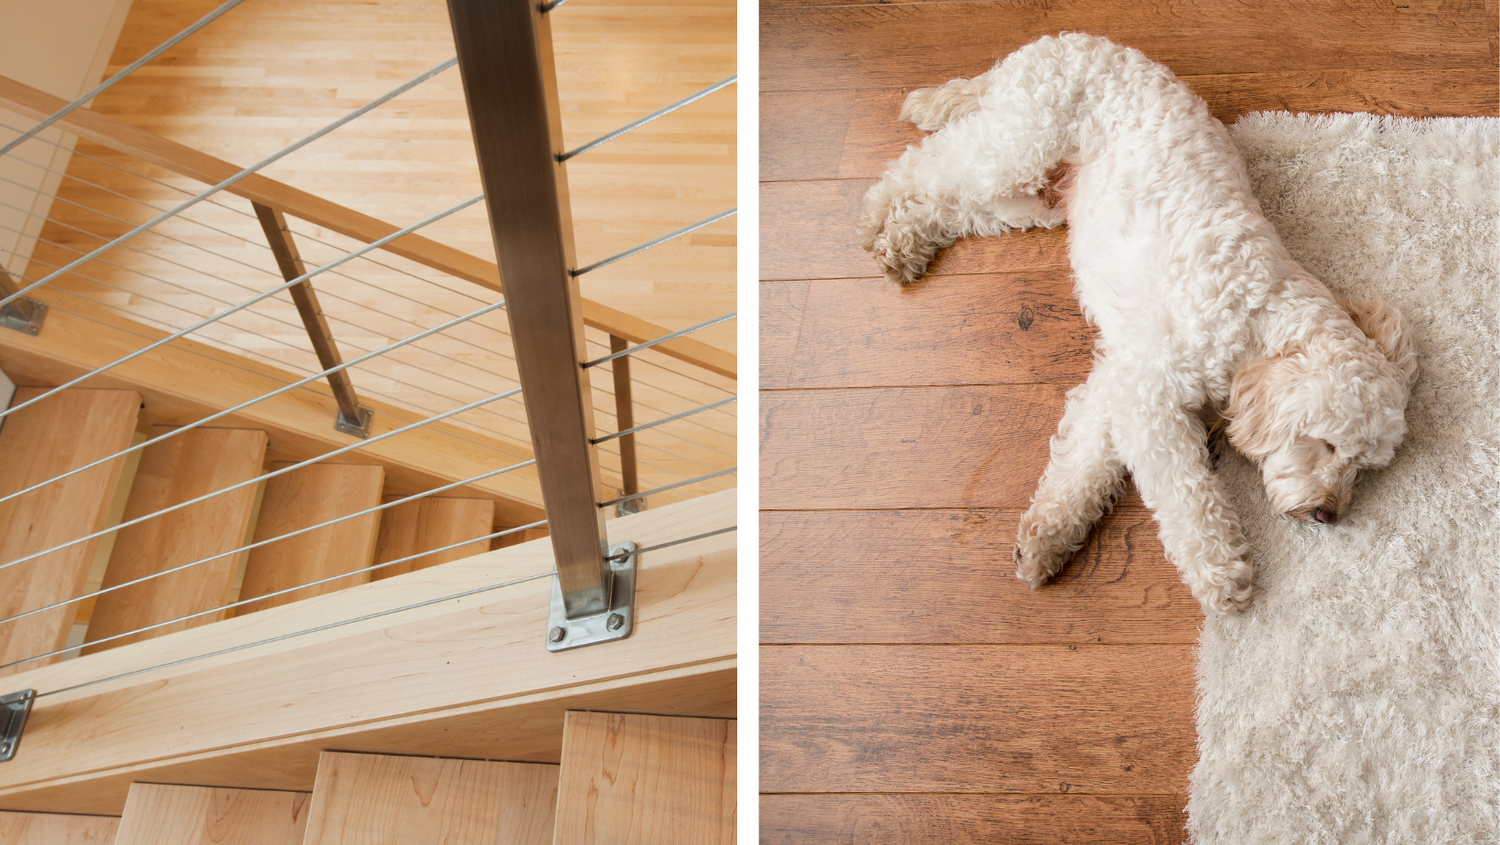 How Do You Dog Proof Wooden Stairs?